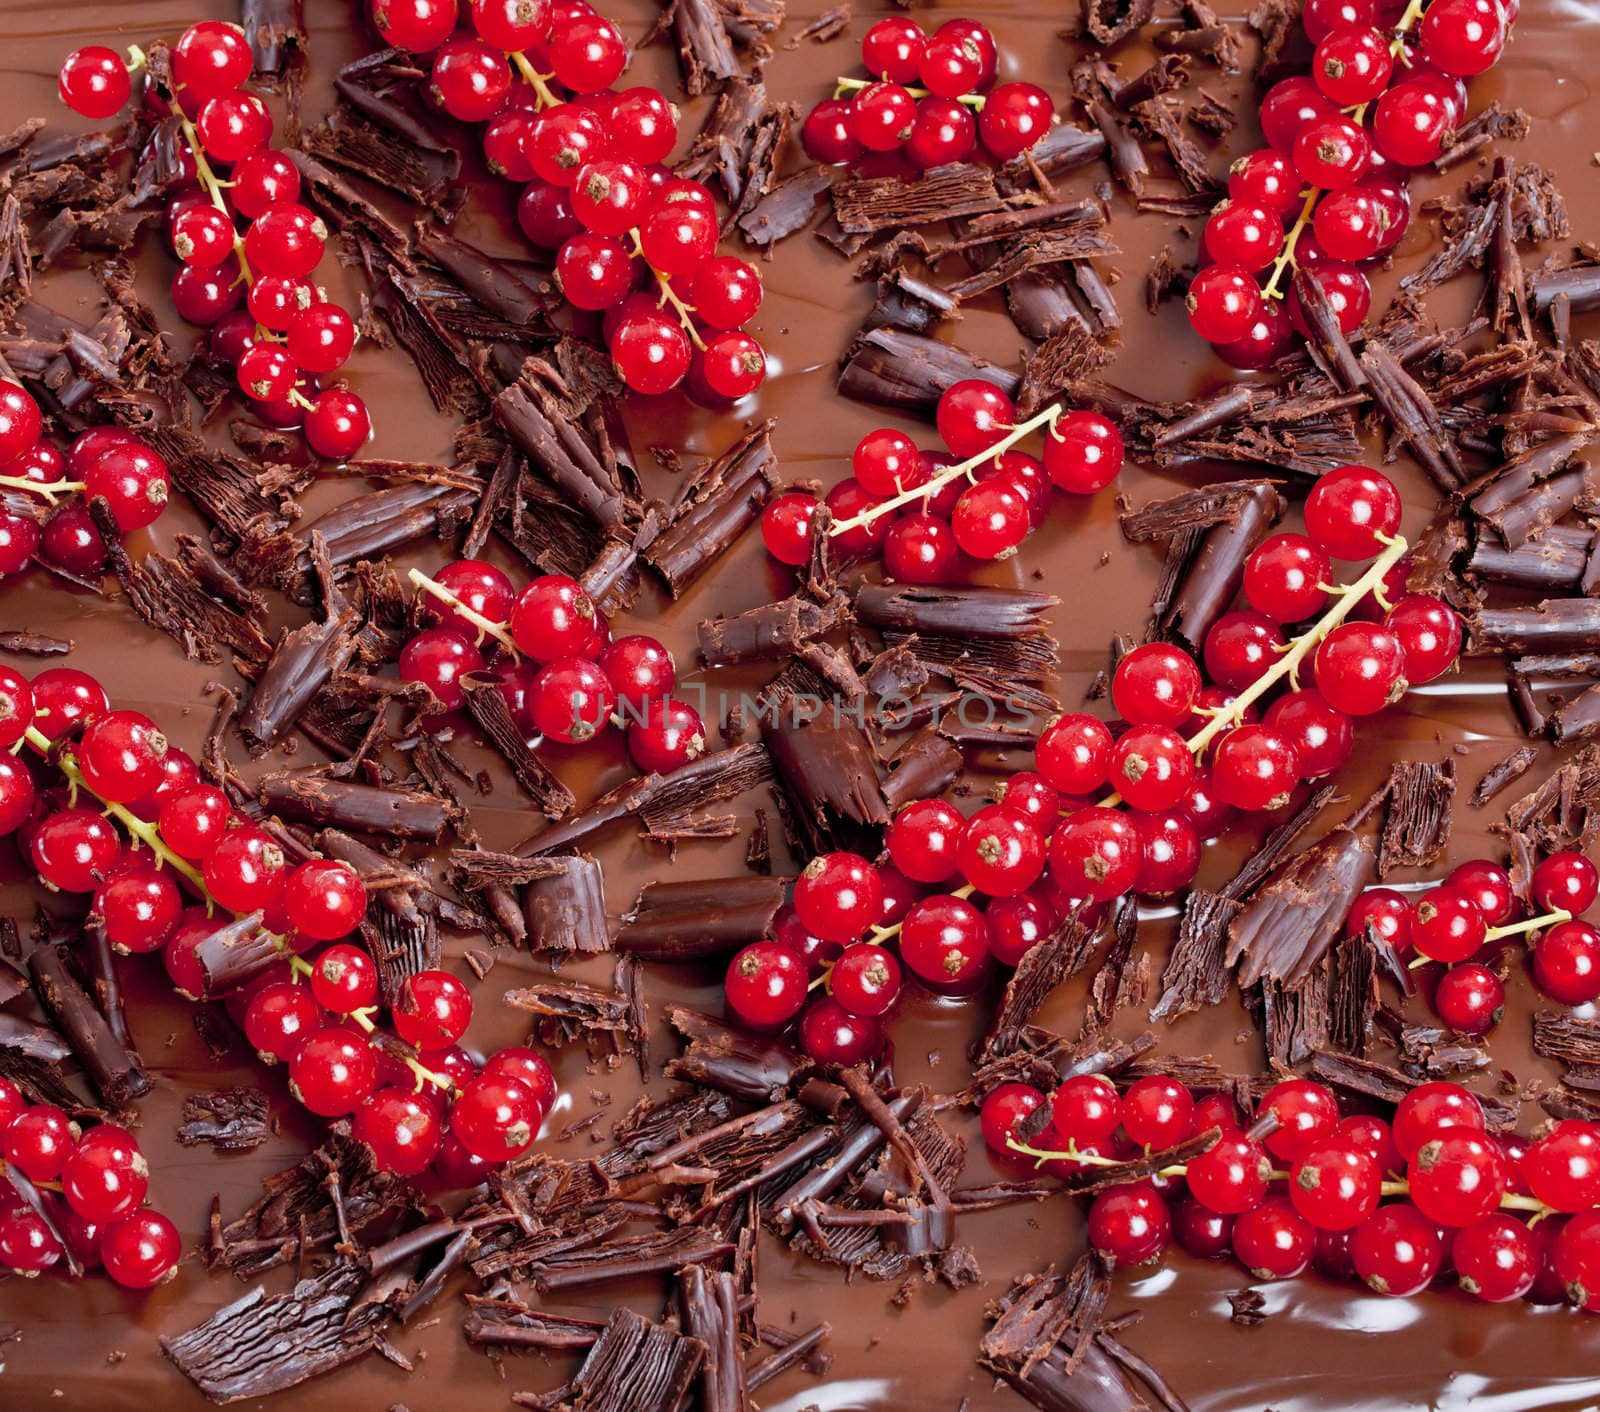 red currant with chocolate by phbcz